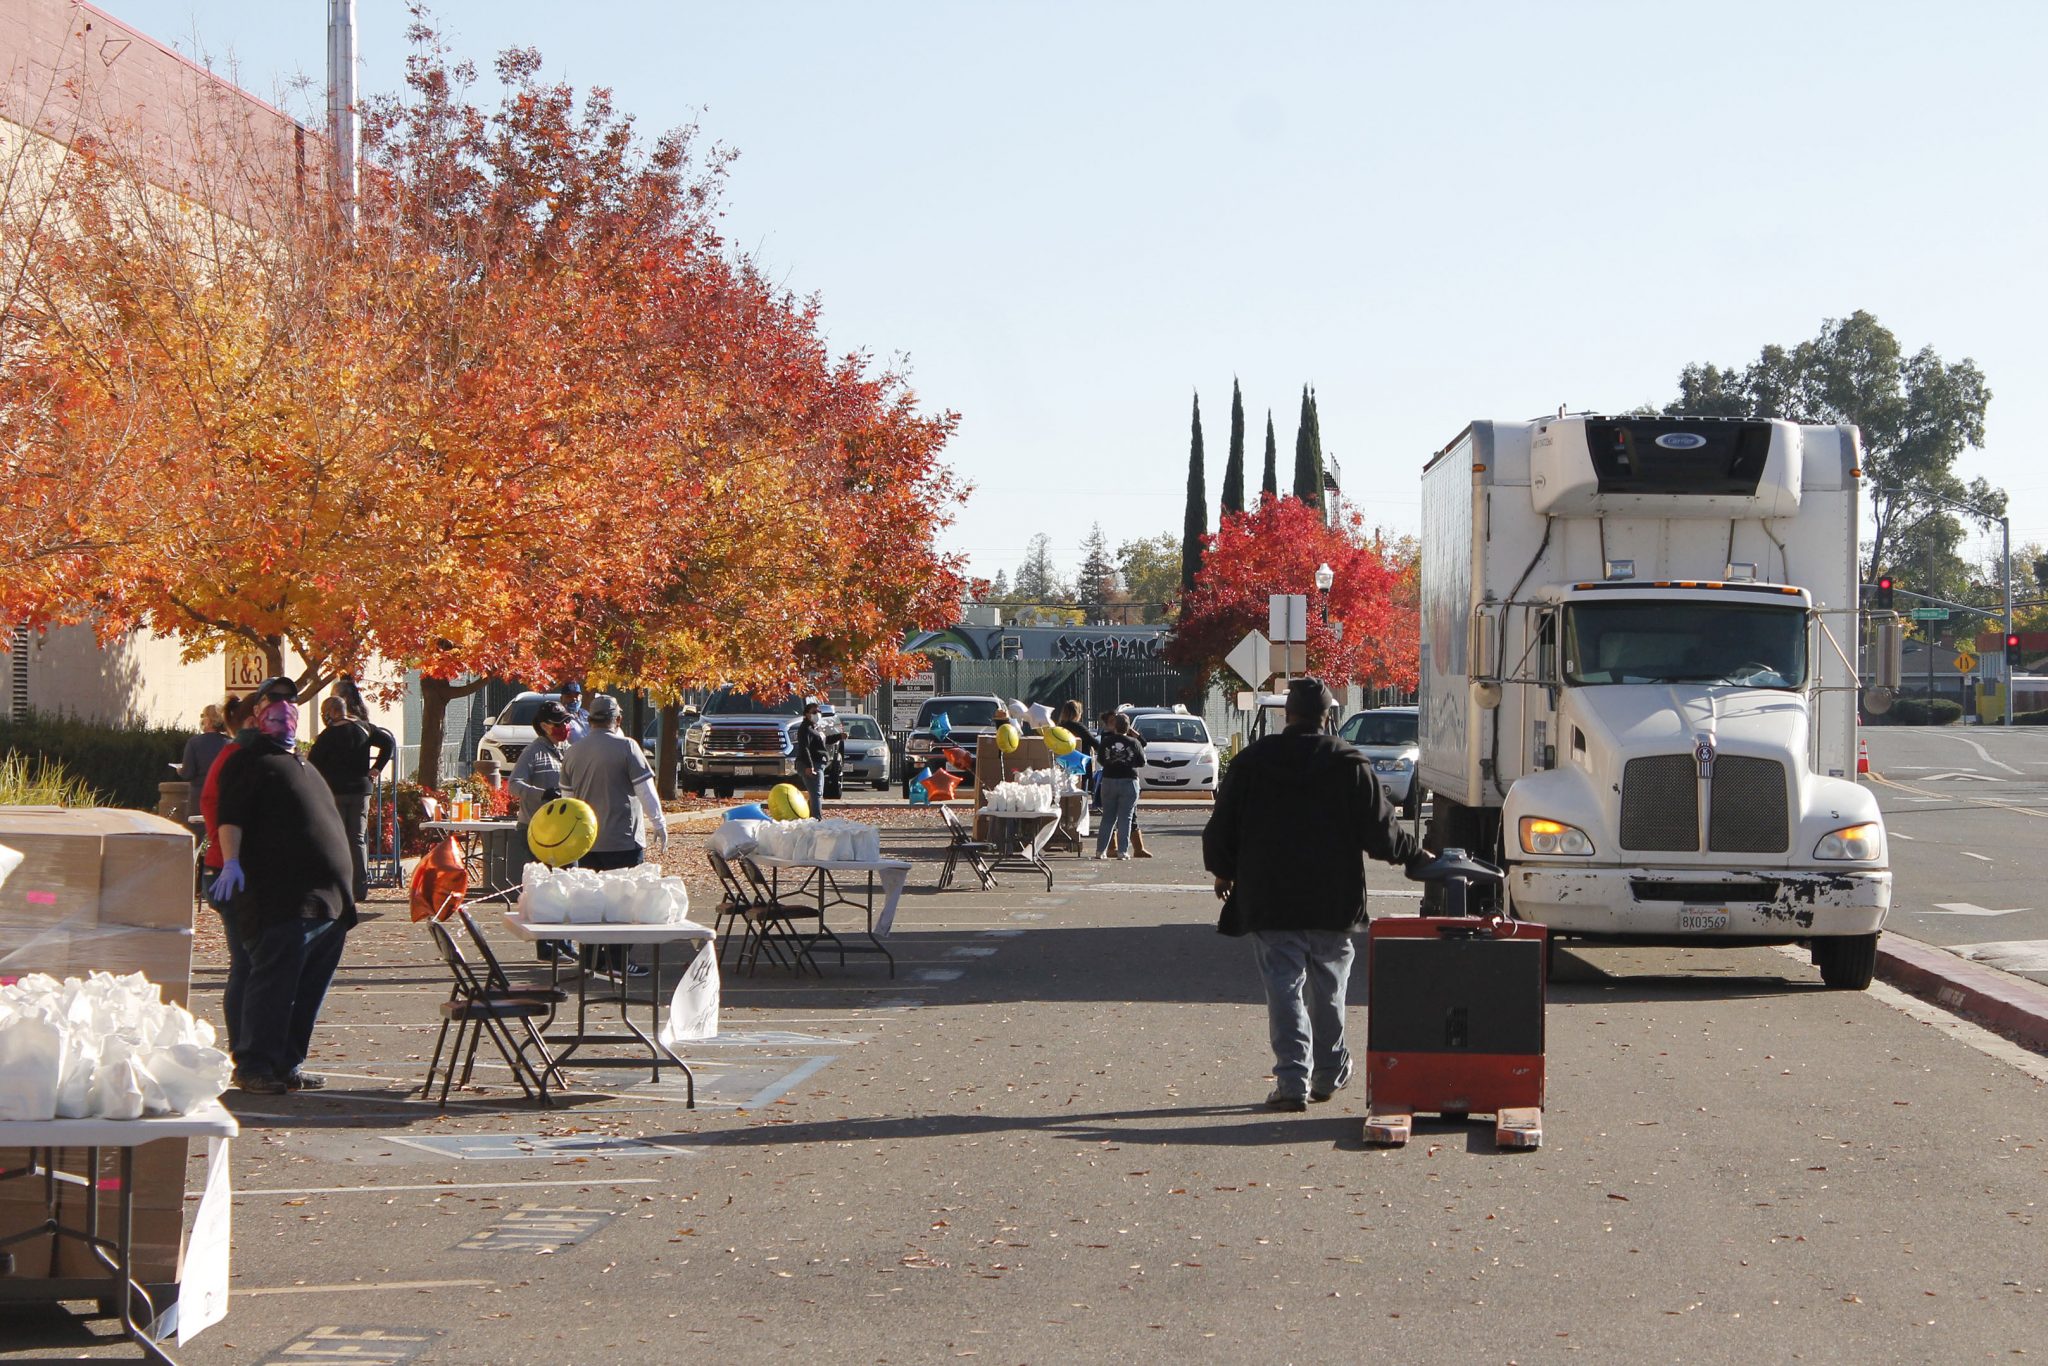 A Sacramento Food Bank truck drops off boxes of food to each table as volunteers ready for the day’s distribution. (Shelby Tolly/stolly.express@gmail.com)